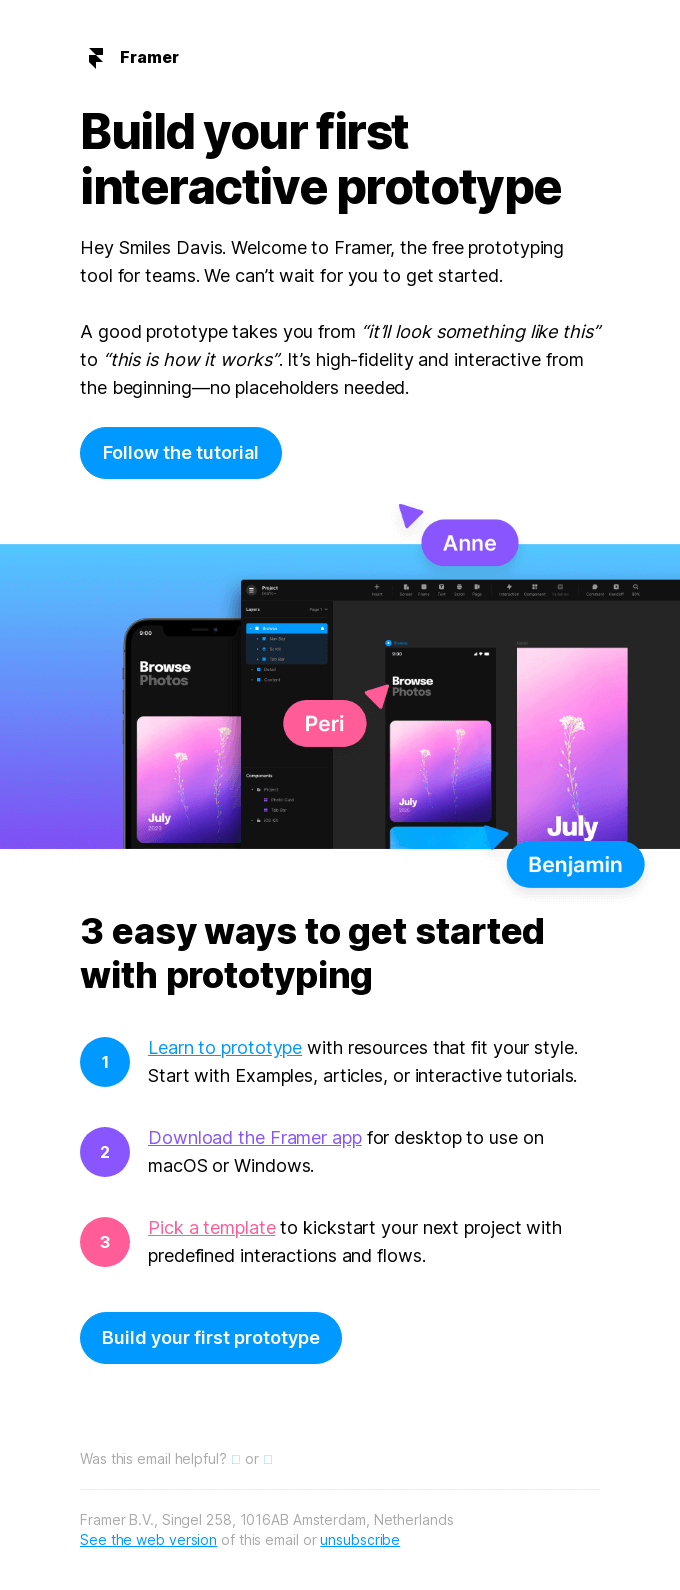 Hi there—here’s how to get started on your first prototype